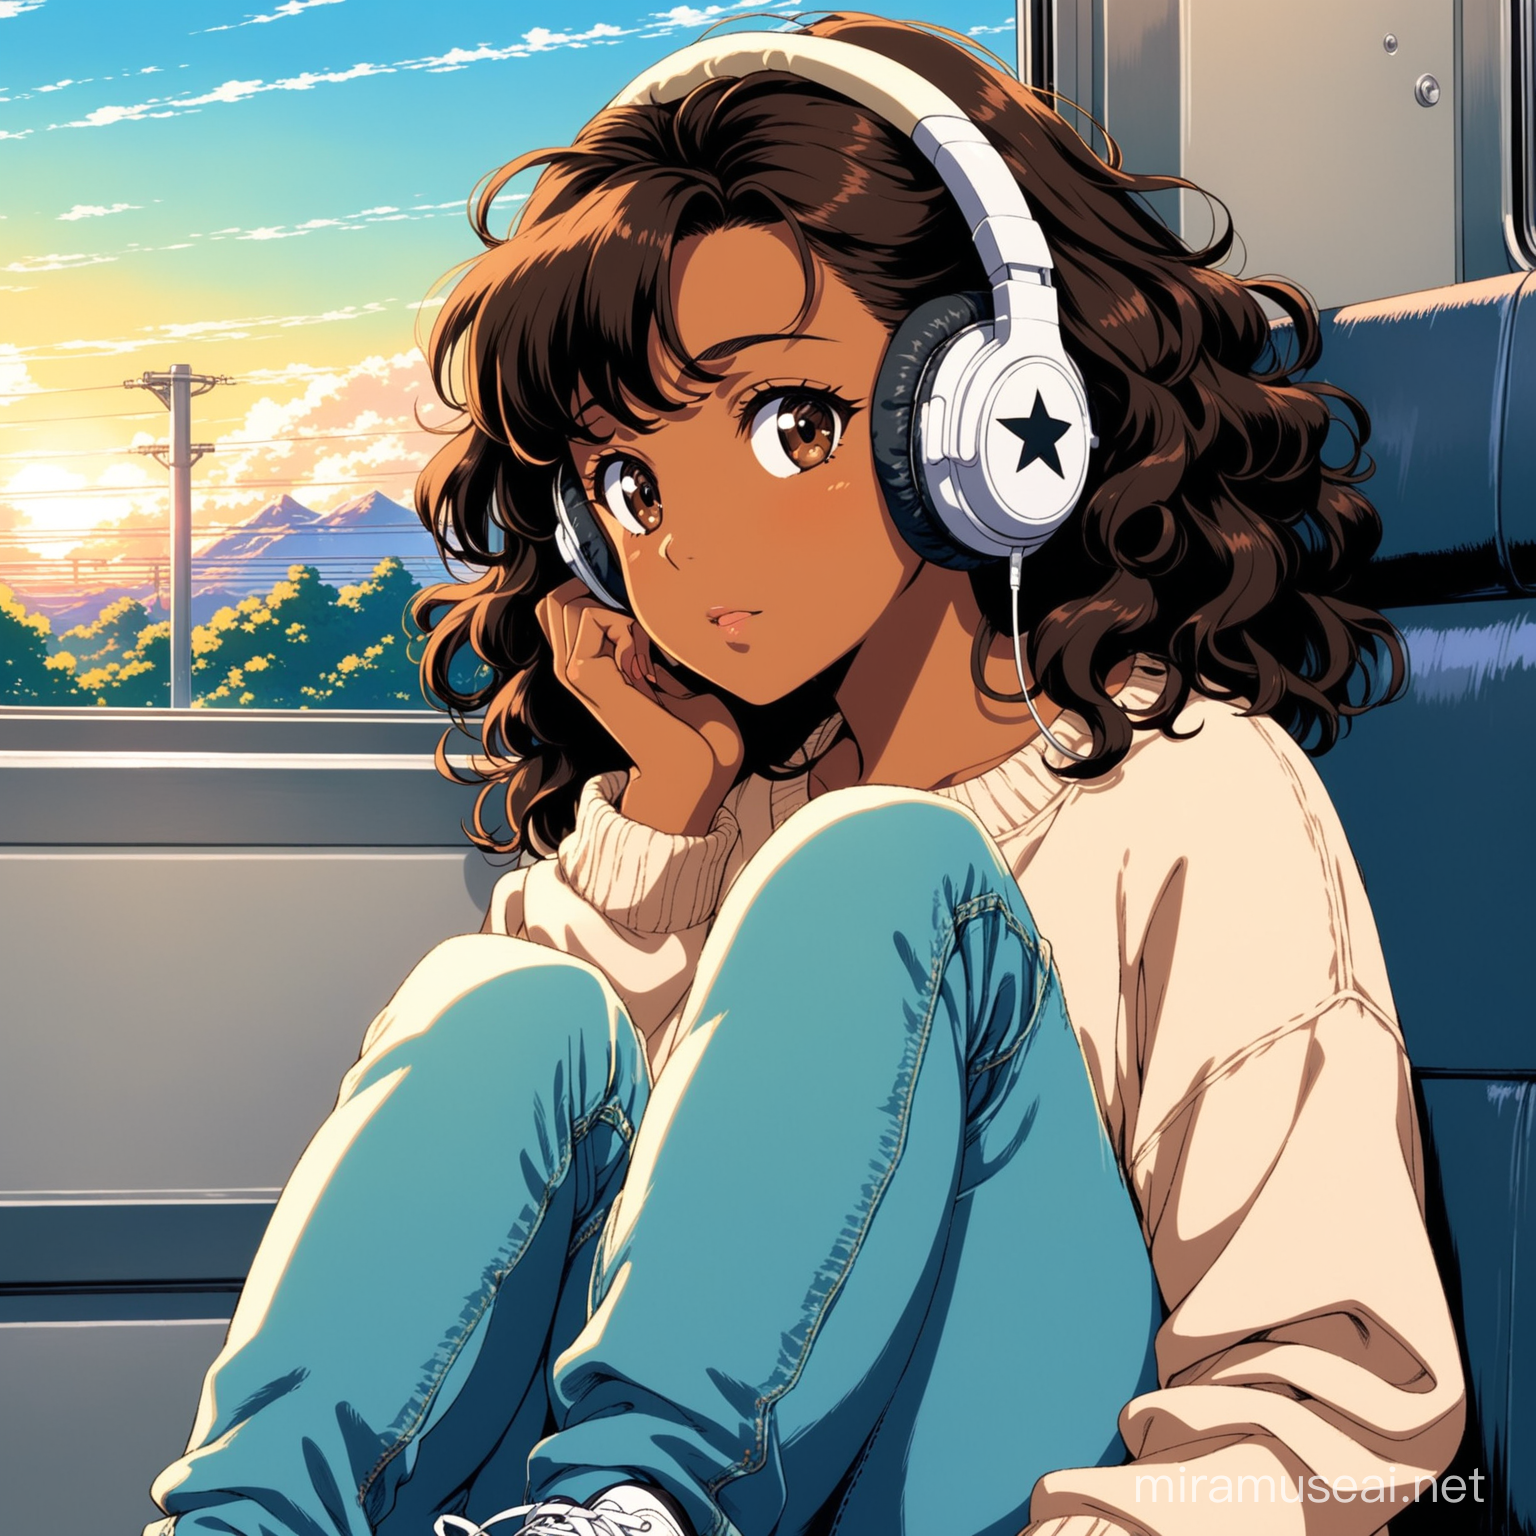 90s anime, detailed,scenic,pretty girl with brown skin and dark brown eyes,with medium length puffy black curly hair sitting in a train and wearing headphones, girl should be looking out the window and wearing a sweater, jeans and converse shoes